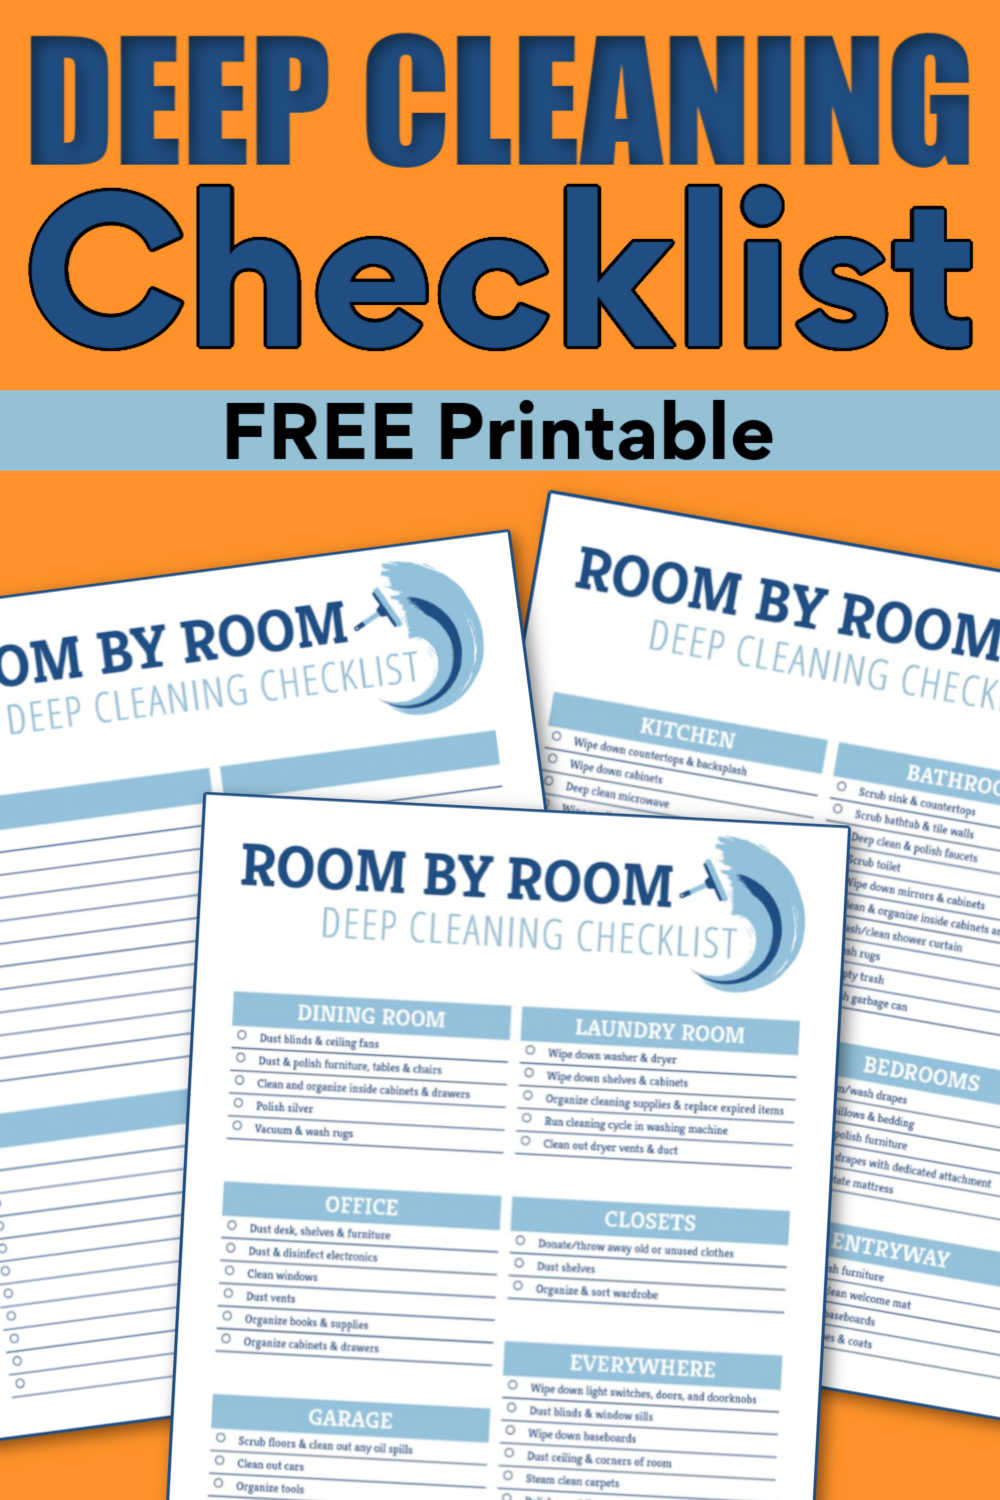 FREE Printable! Deep Cleaning Checklist